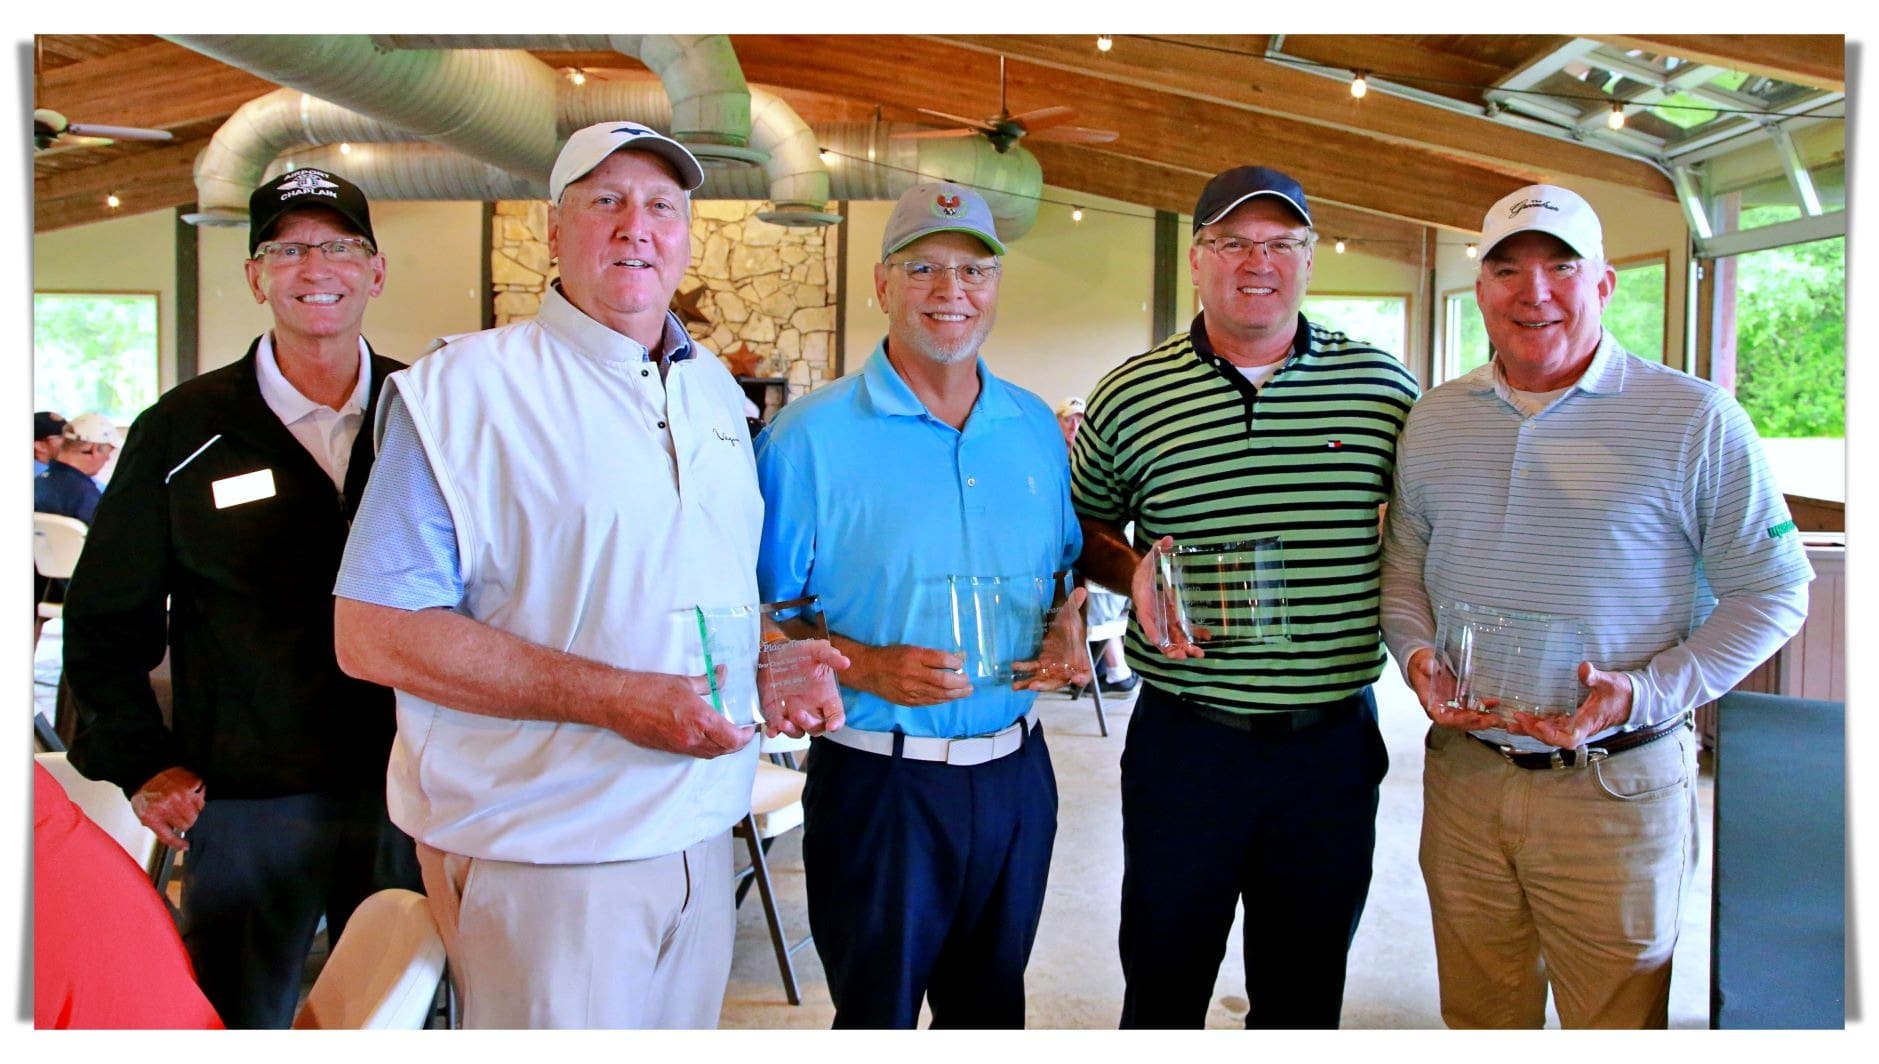 Four men holding golf trophies in front of a group of people.